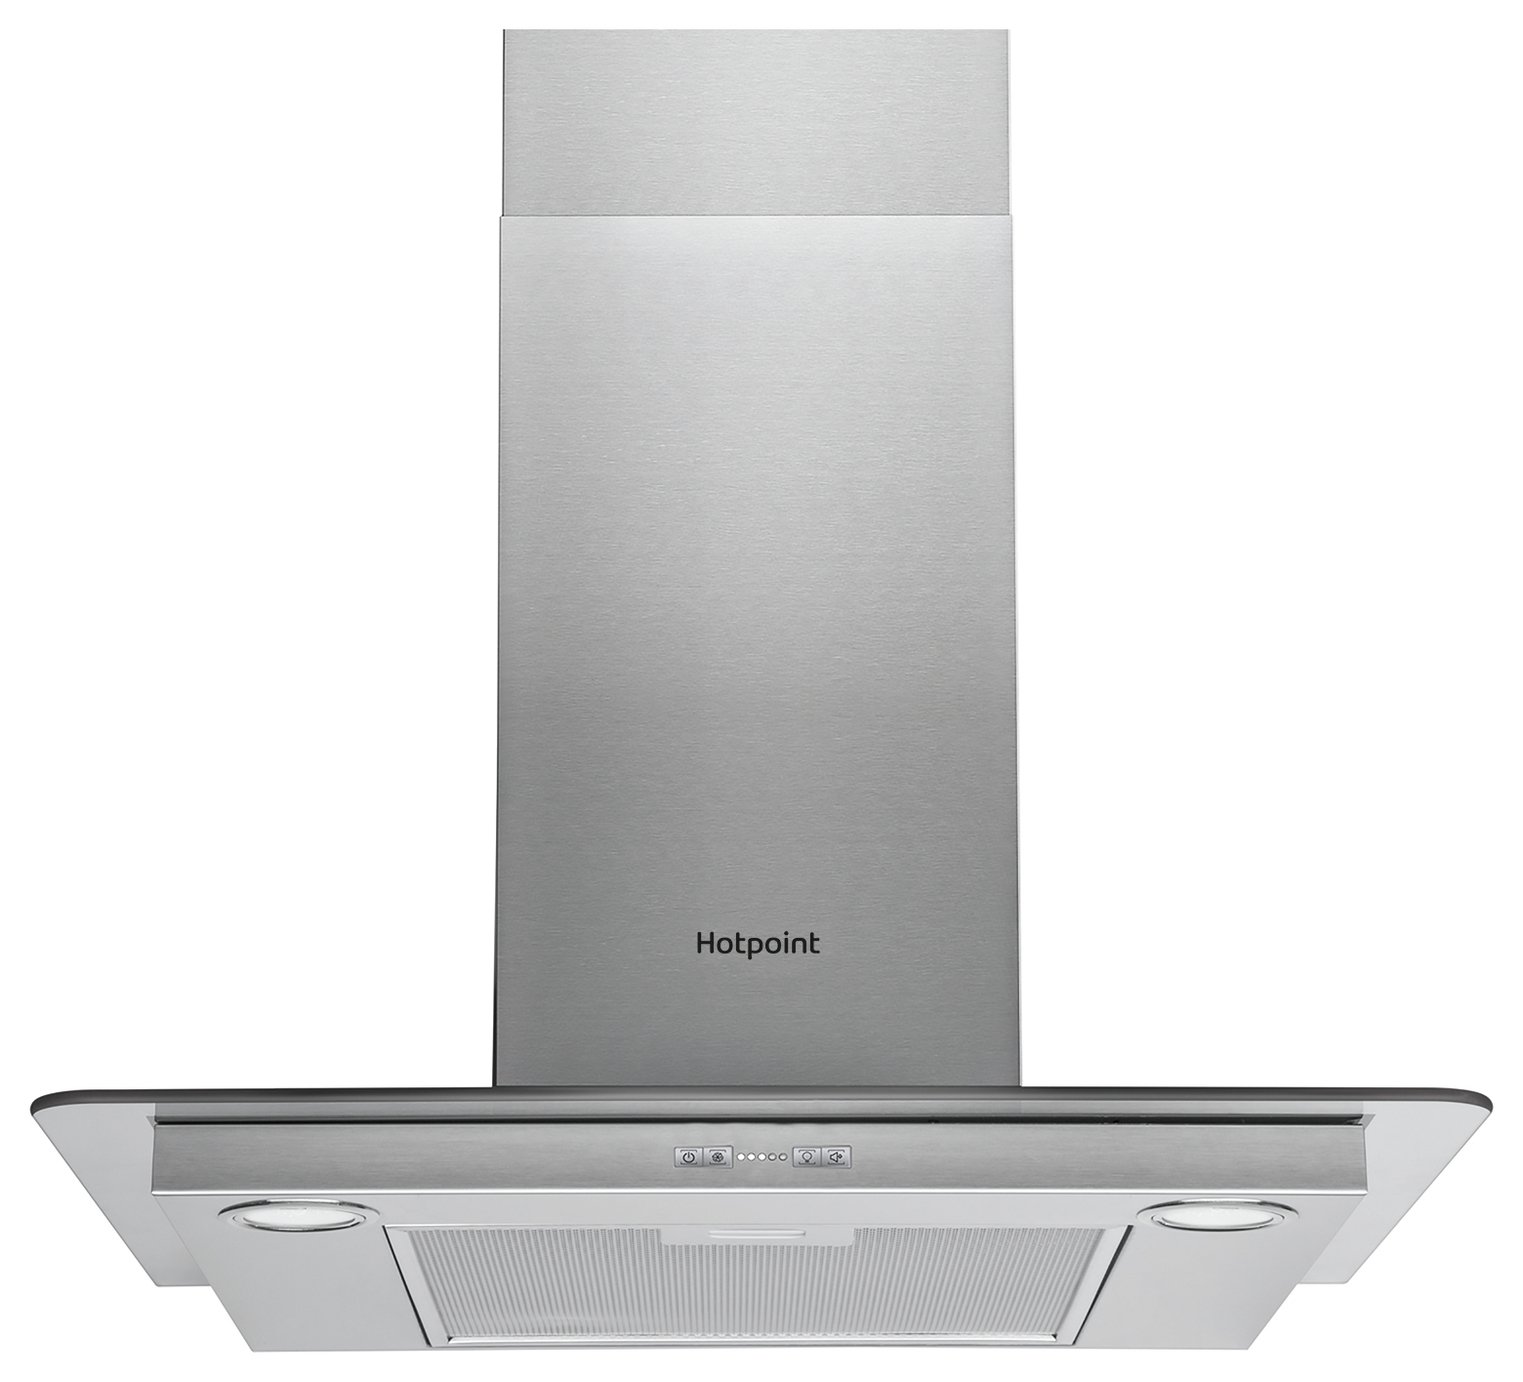 Hotpoint PHFG7.4FLMX 70cm Cooker Hood review